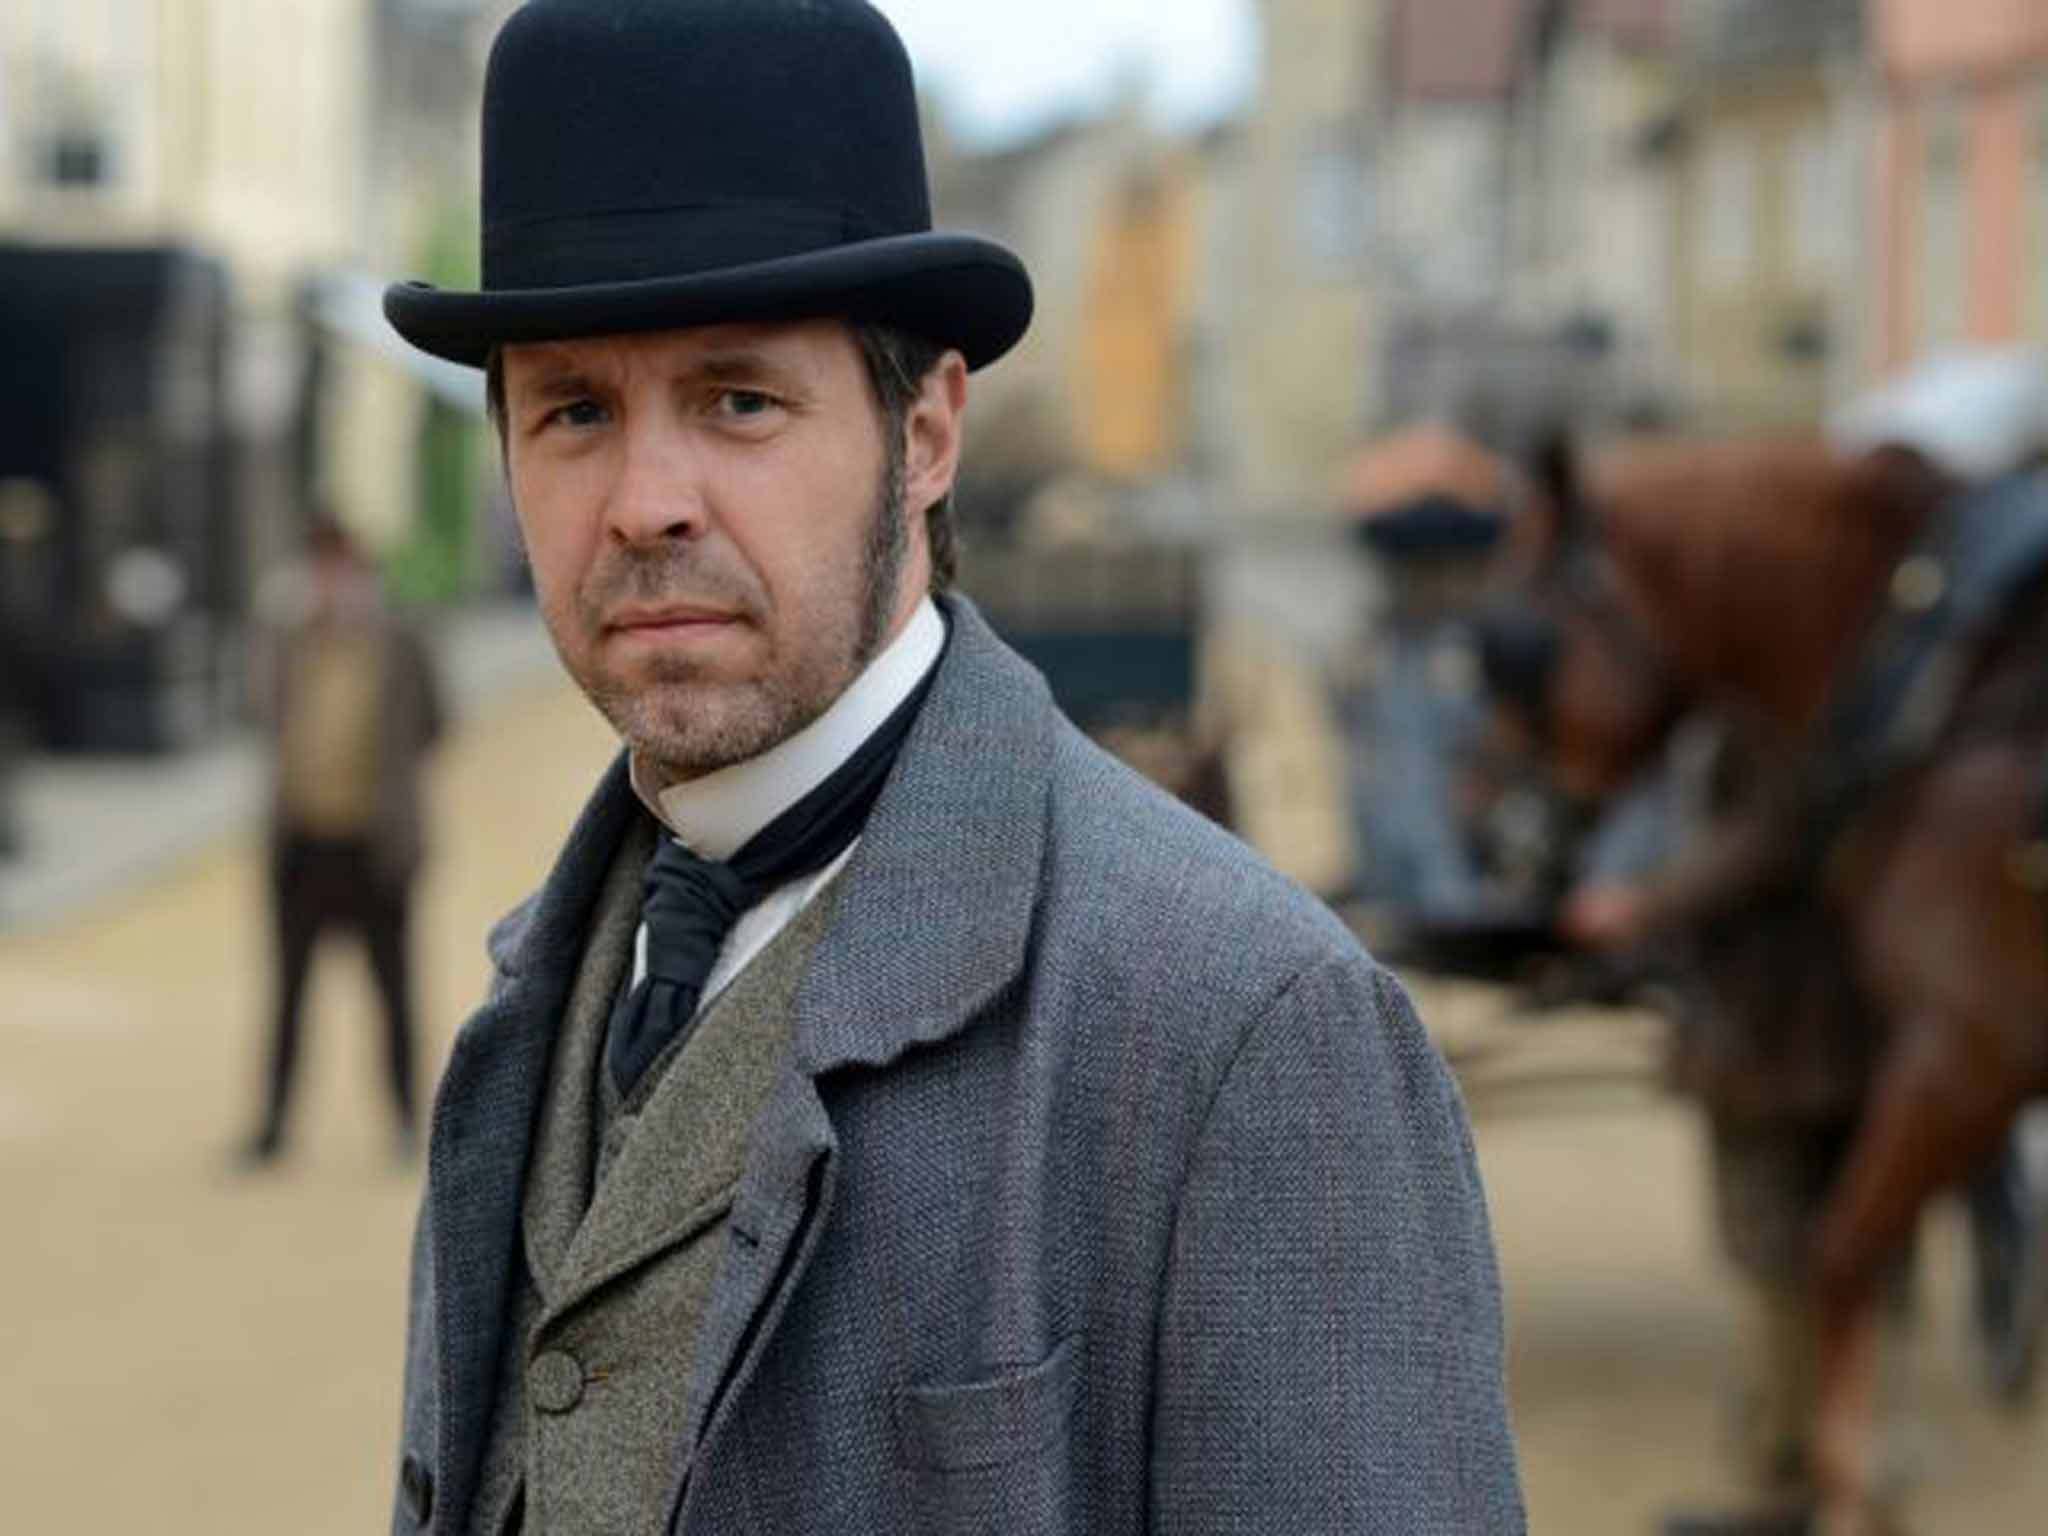 Paddy Considine as Jack Whicher in ‘The Suspicions of Mr Whicher'